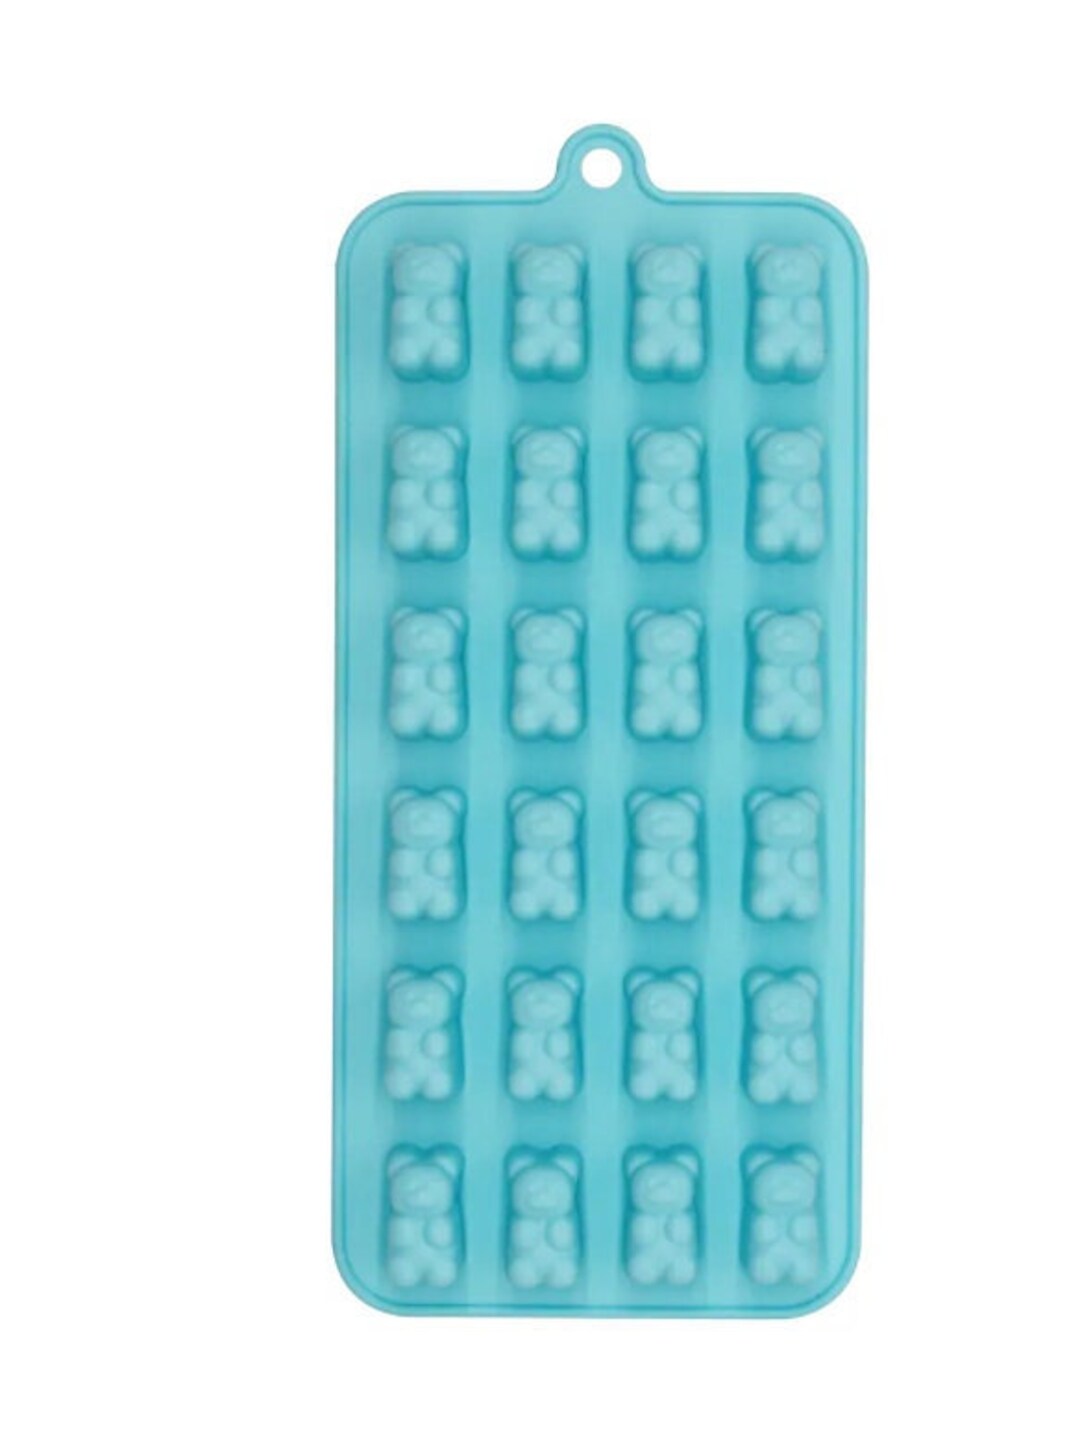 Gummy Bears Silicone Candy Mold Wilton 24 Cavities Blue